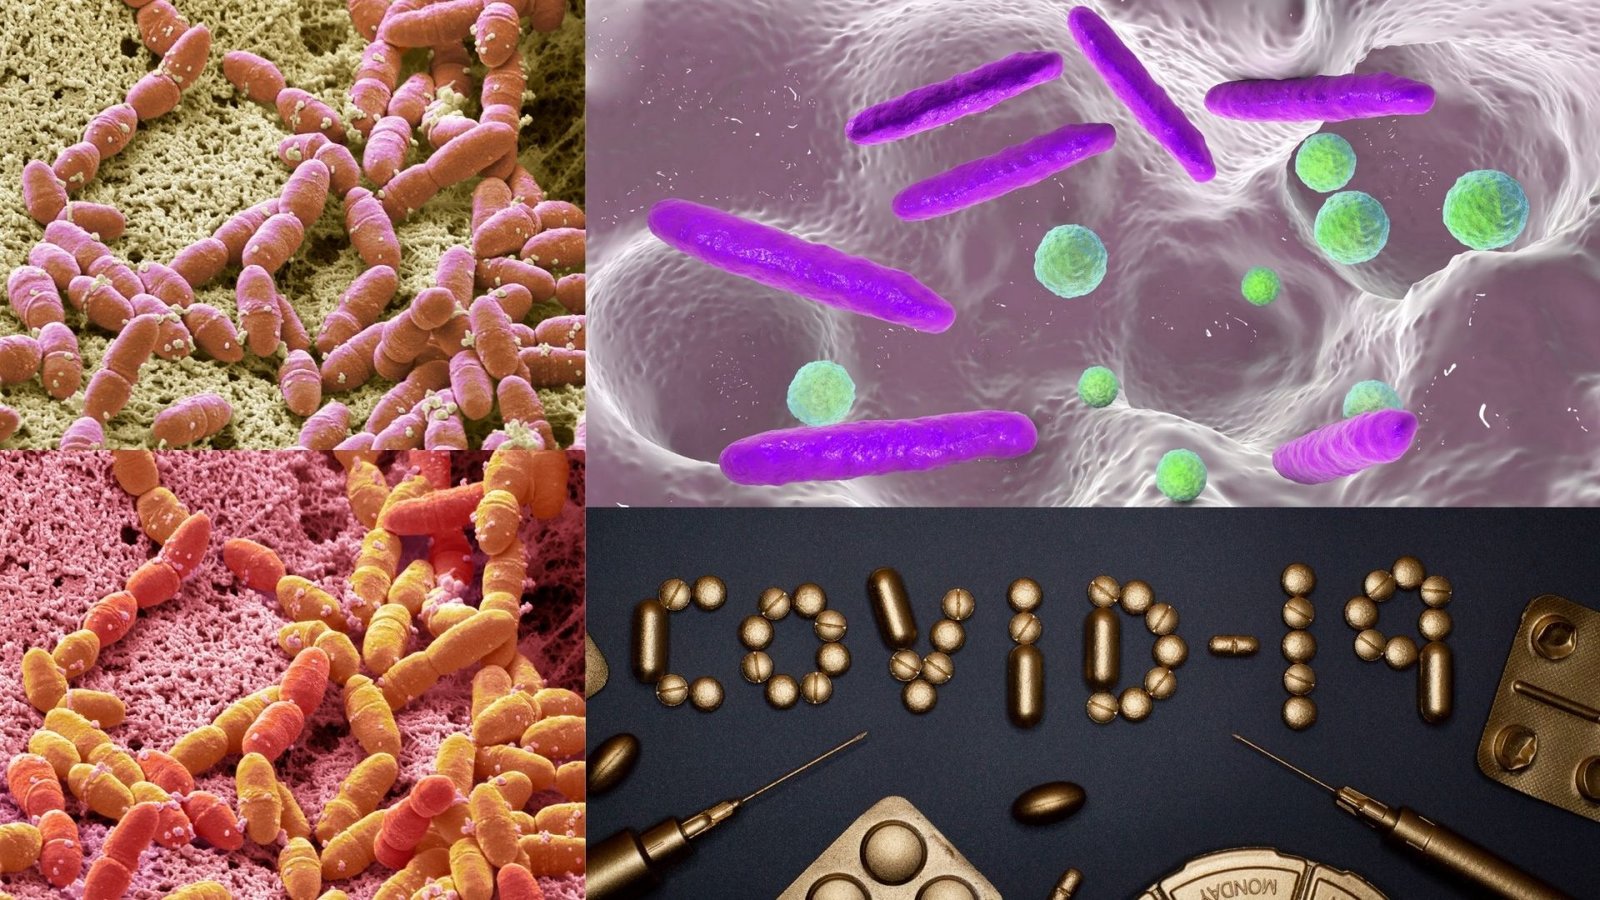 The Coronavirus Is Mutating: What We Know About the New Variants